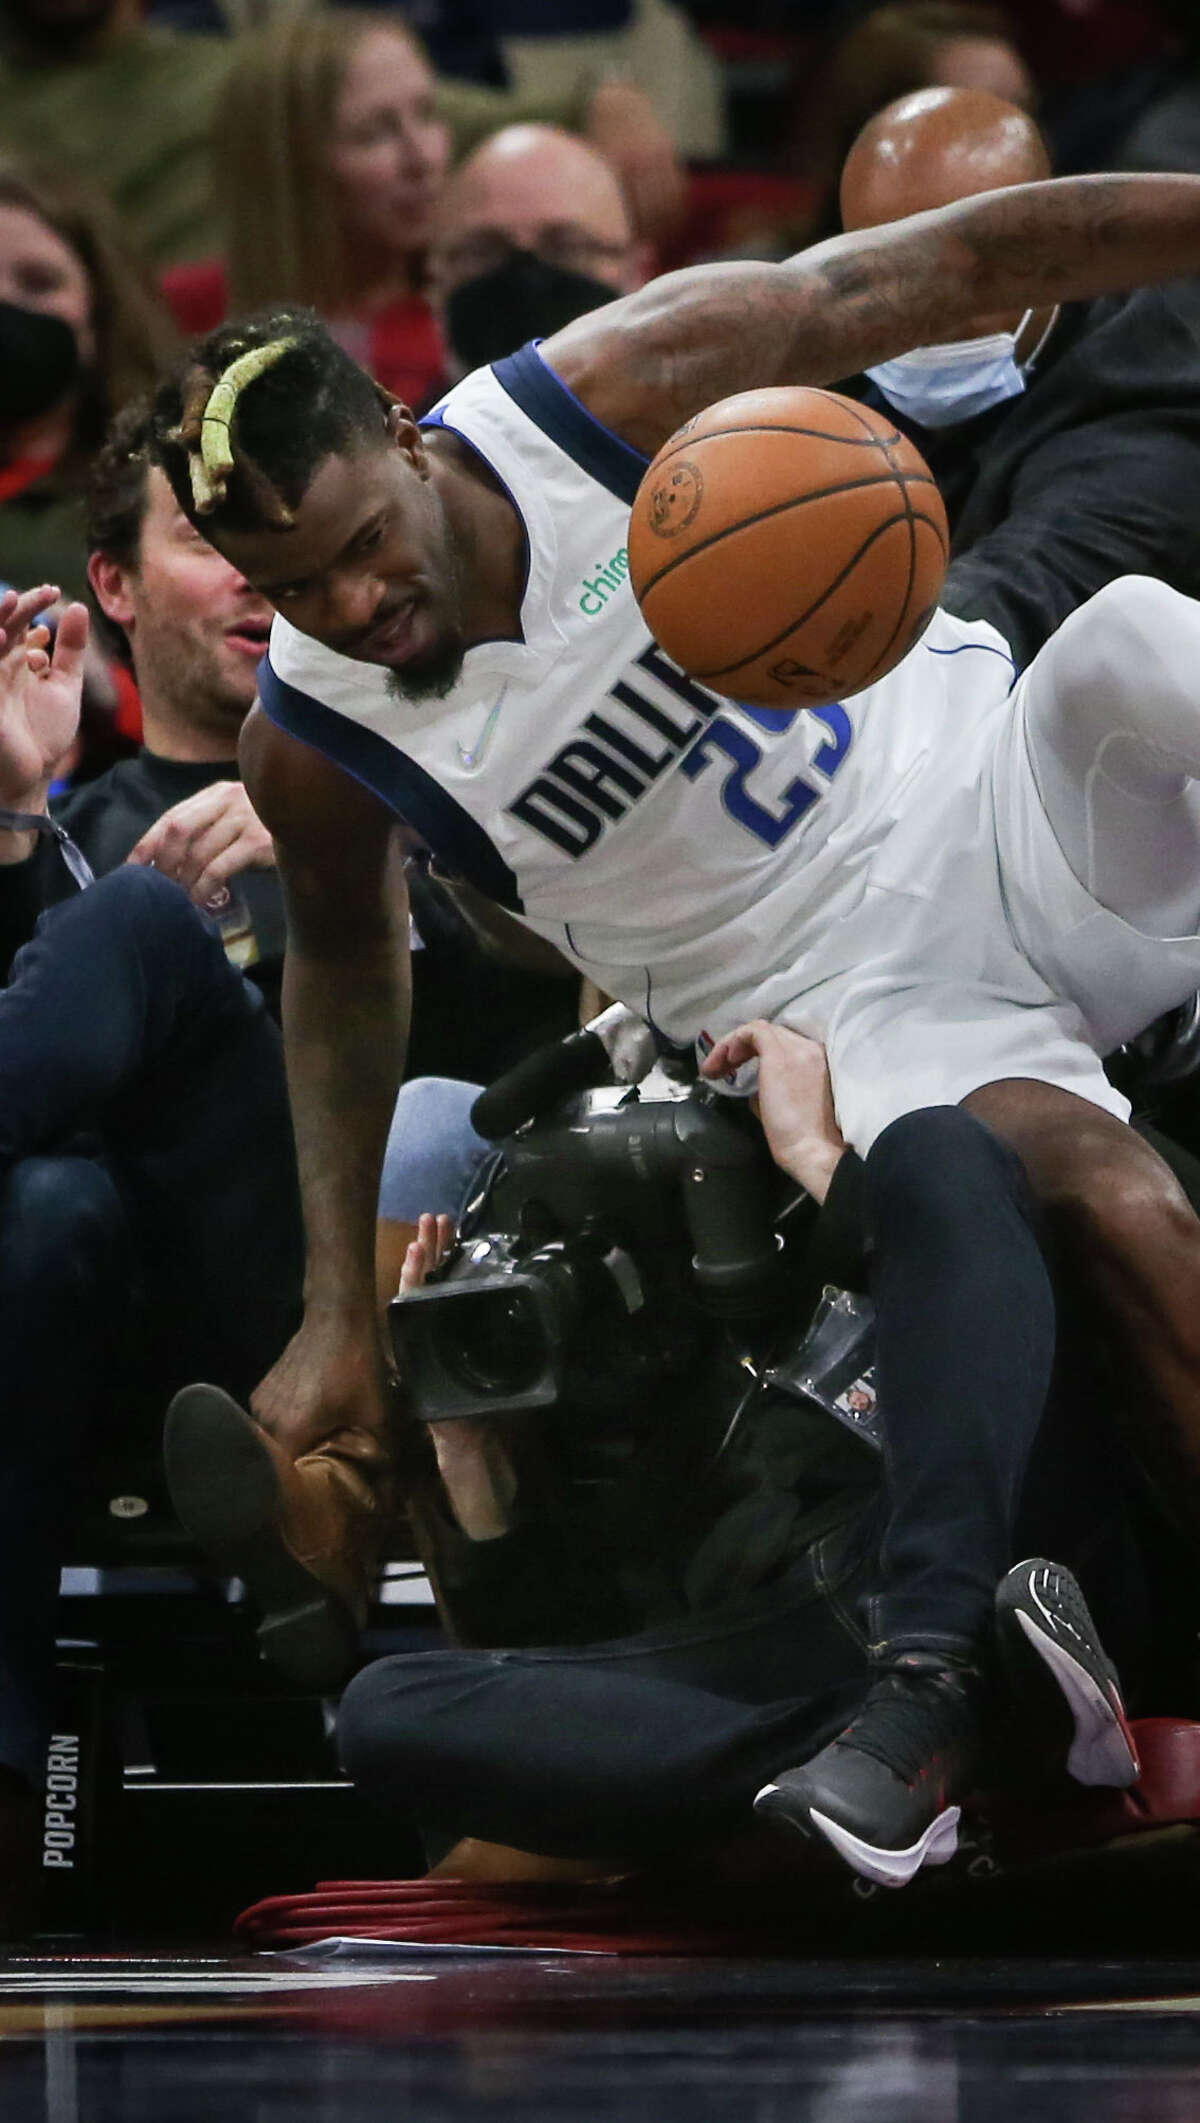 Dallas Mavericks forward Reggie Bullock (25) falls on a television cameraman during the second quarter of an NBA game Friday, Jan. 7, 2022, at the Toyota Center in Houston.